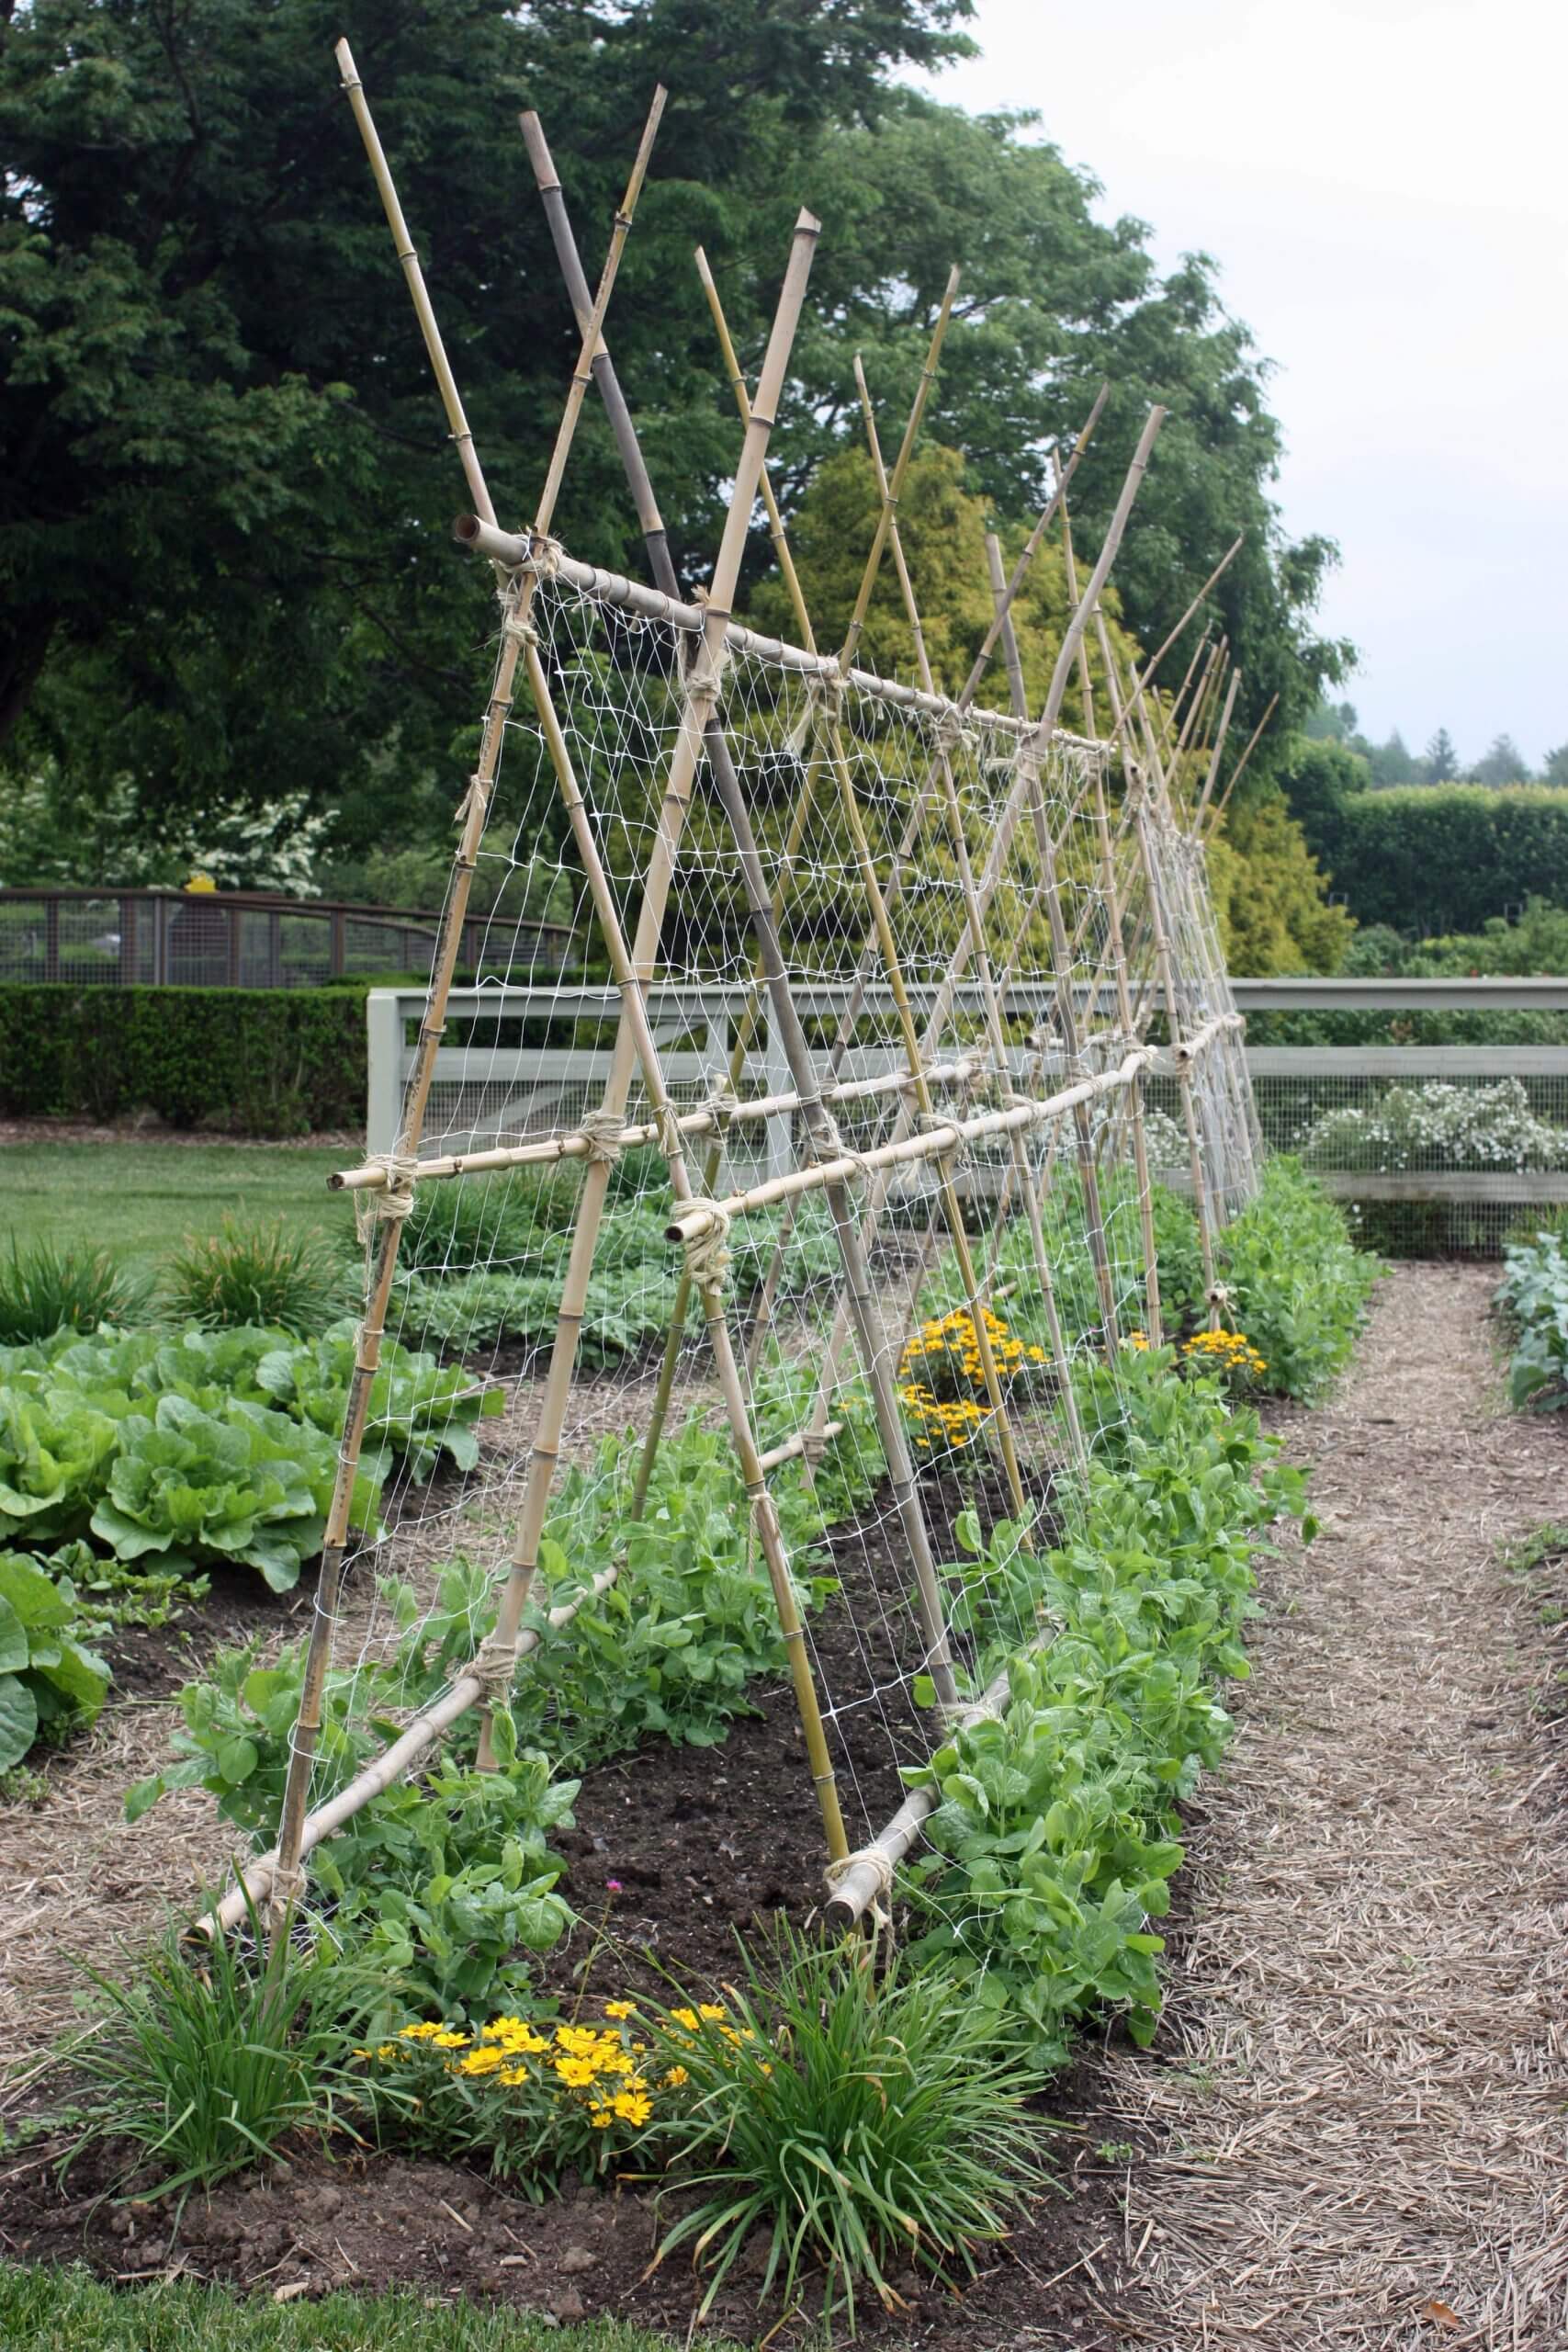 Cucumber and bean trellises are very easy to fashion from bamboo. (photo taken at Longwood Gardens)